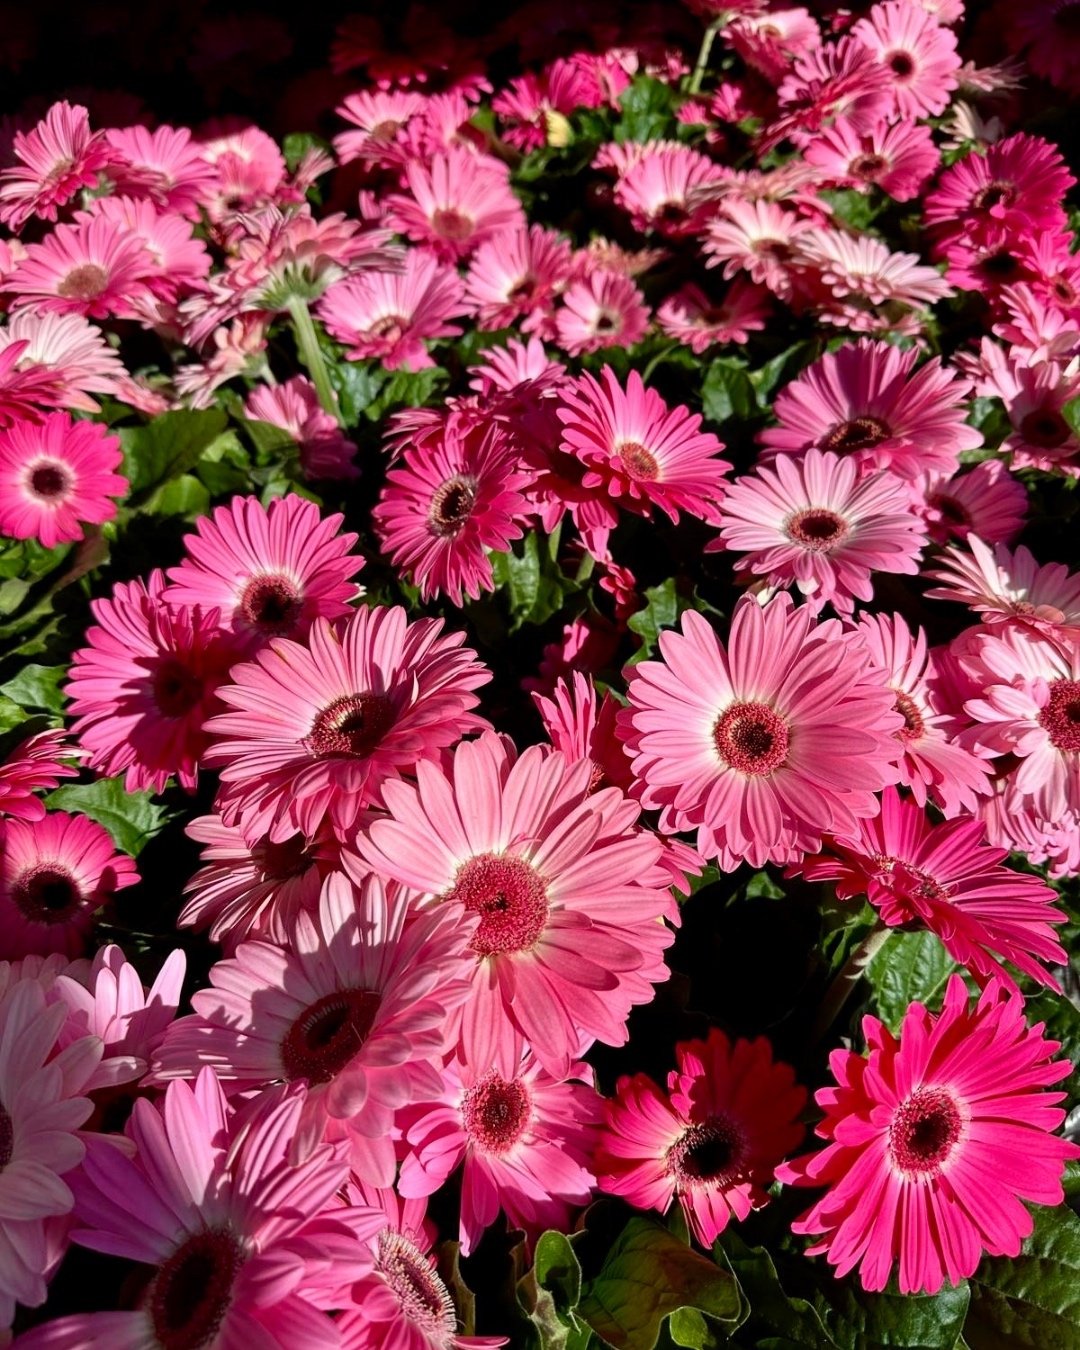 Vibrant pink blooms to brighten up her day! 💐

We are stocked up in-store to create a special bunch for a very special mum! 💗

Drop into the Herdsman store or call us on 9387 3414 and one of our amazing florists will assist you! 

#Churchlands #per